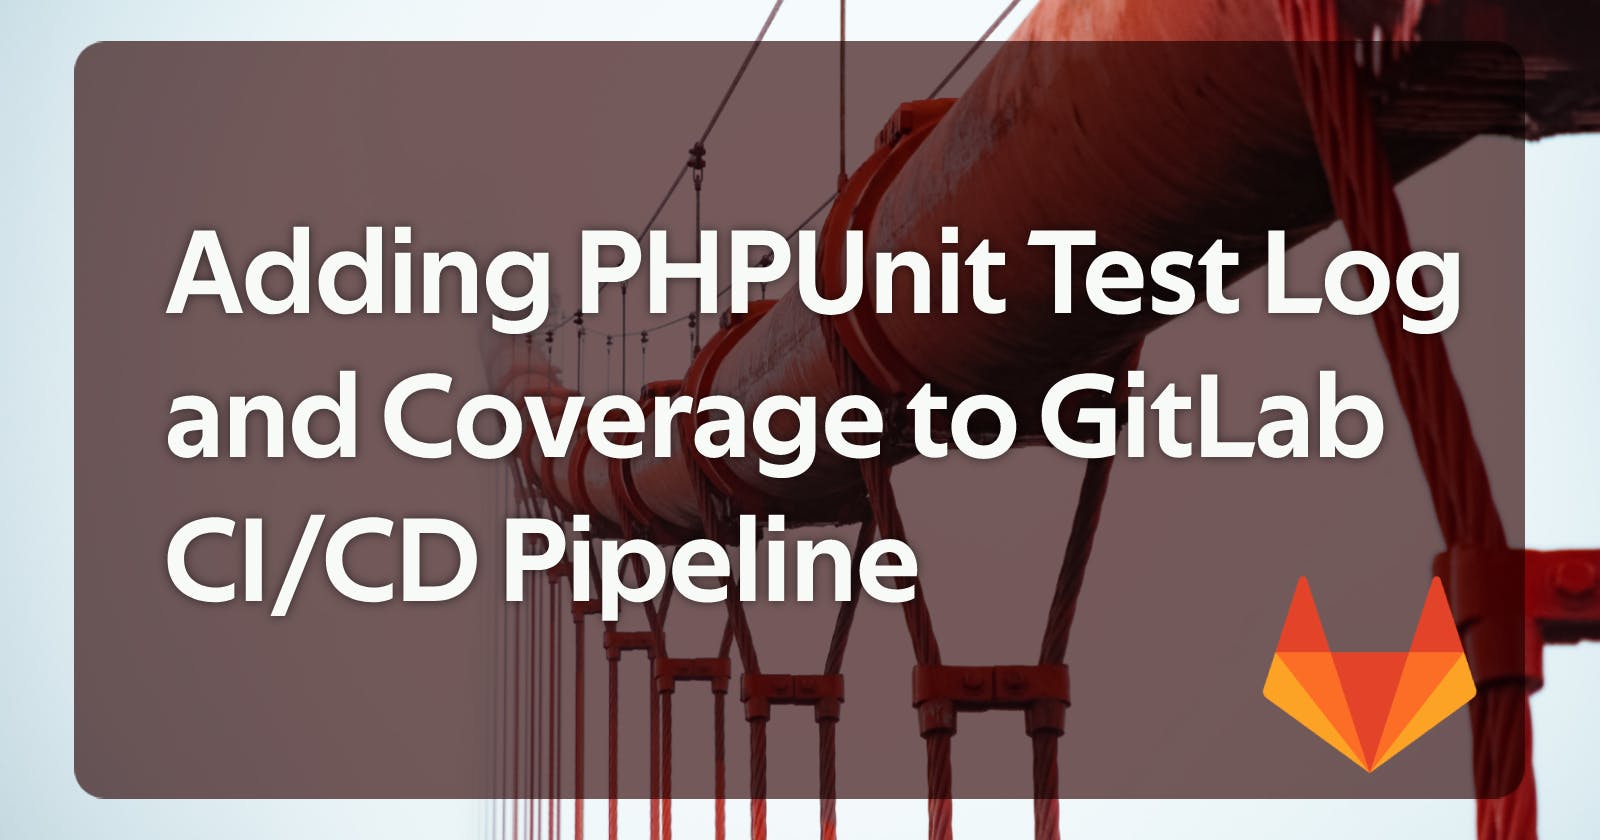 Adding PHPUnit Test Log and Coverage to GitLab CI/CD Pipeline